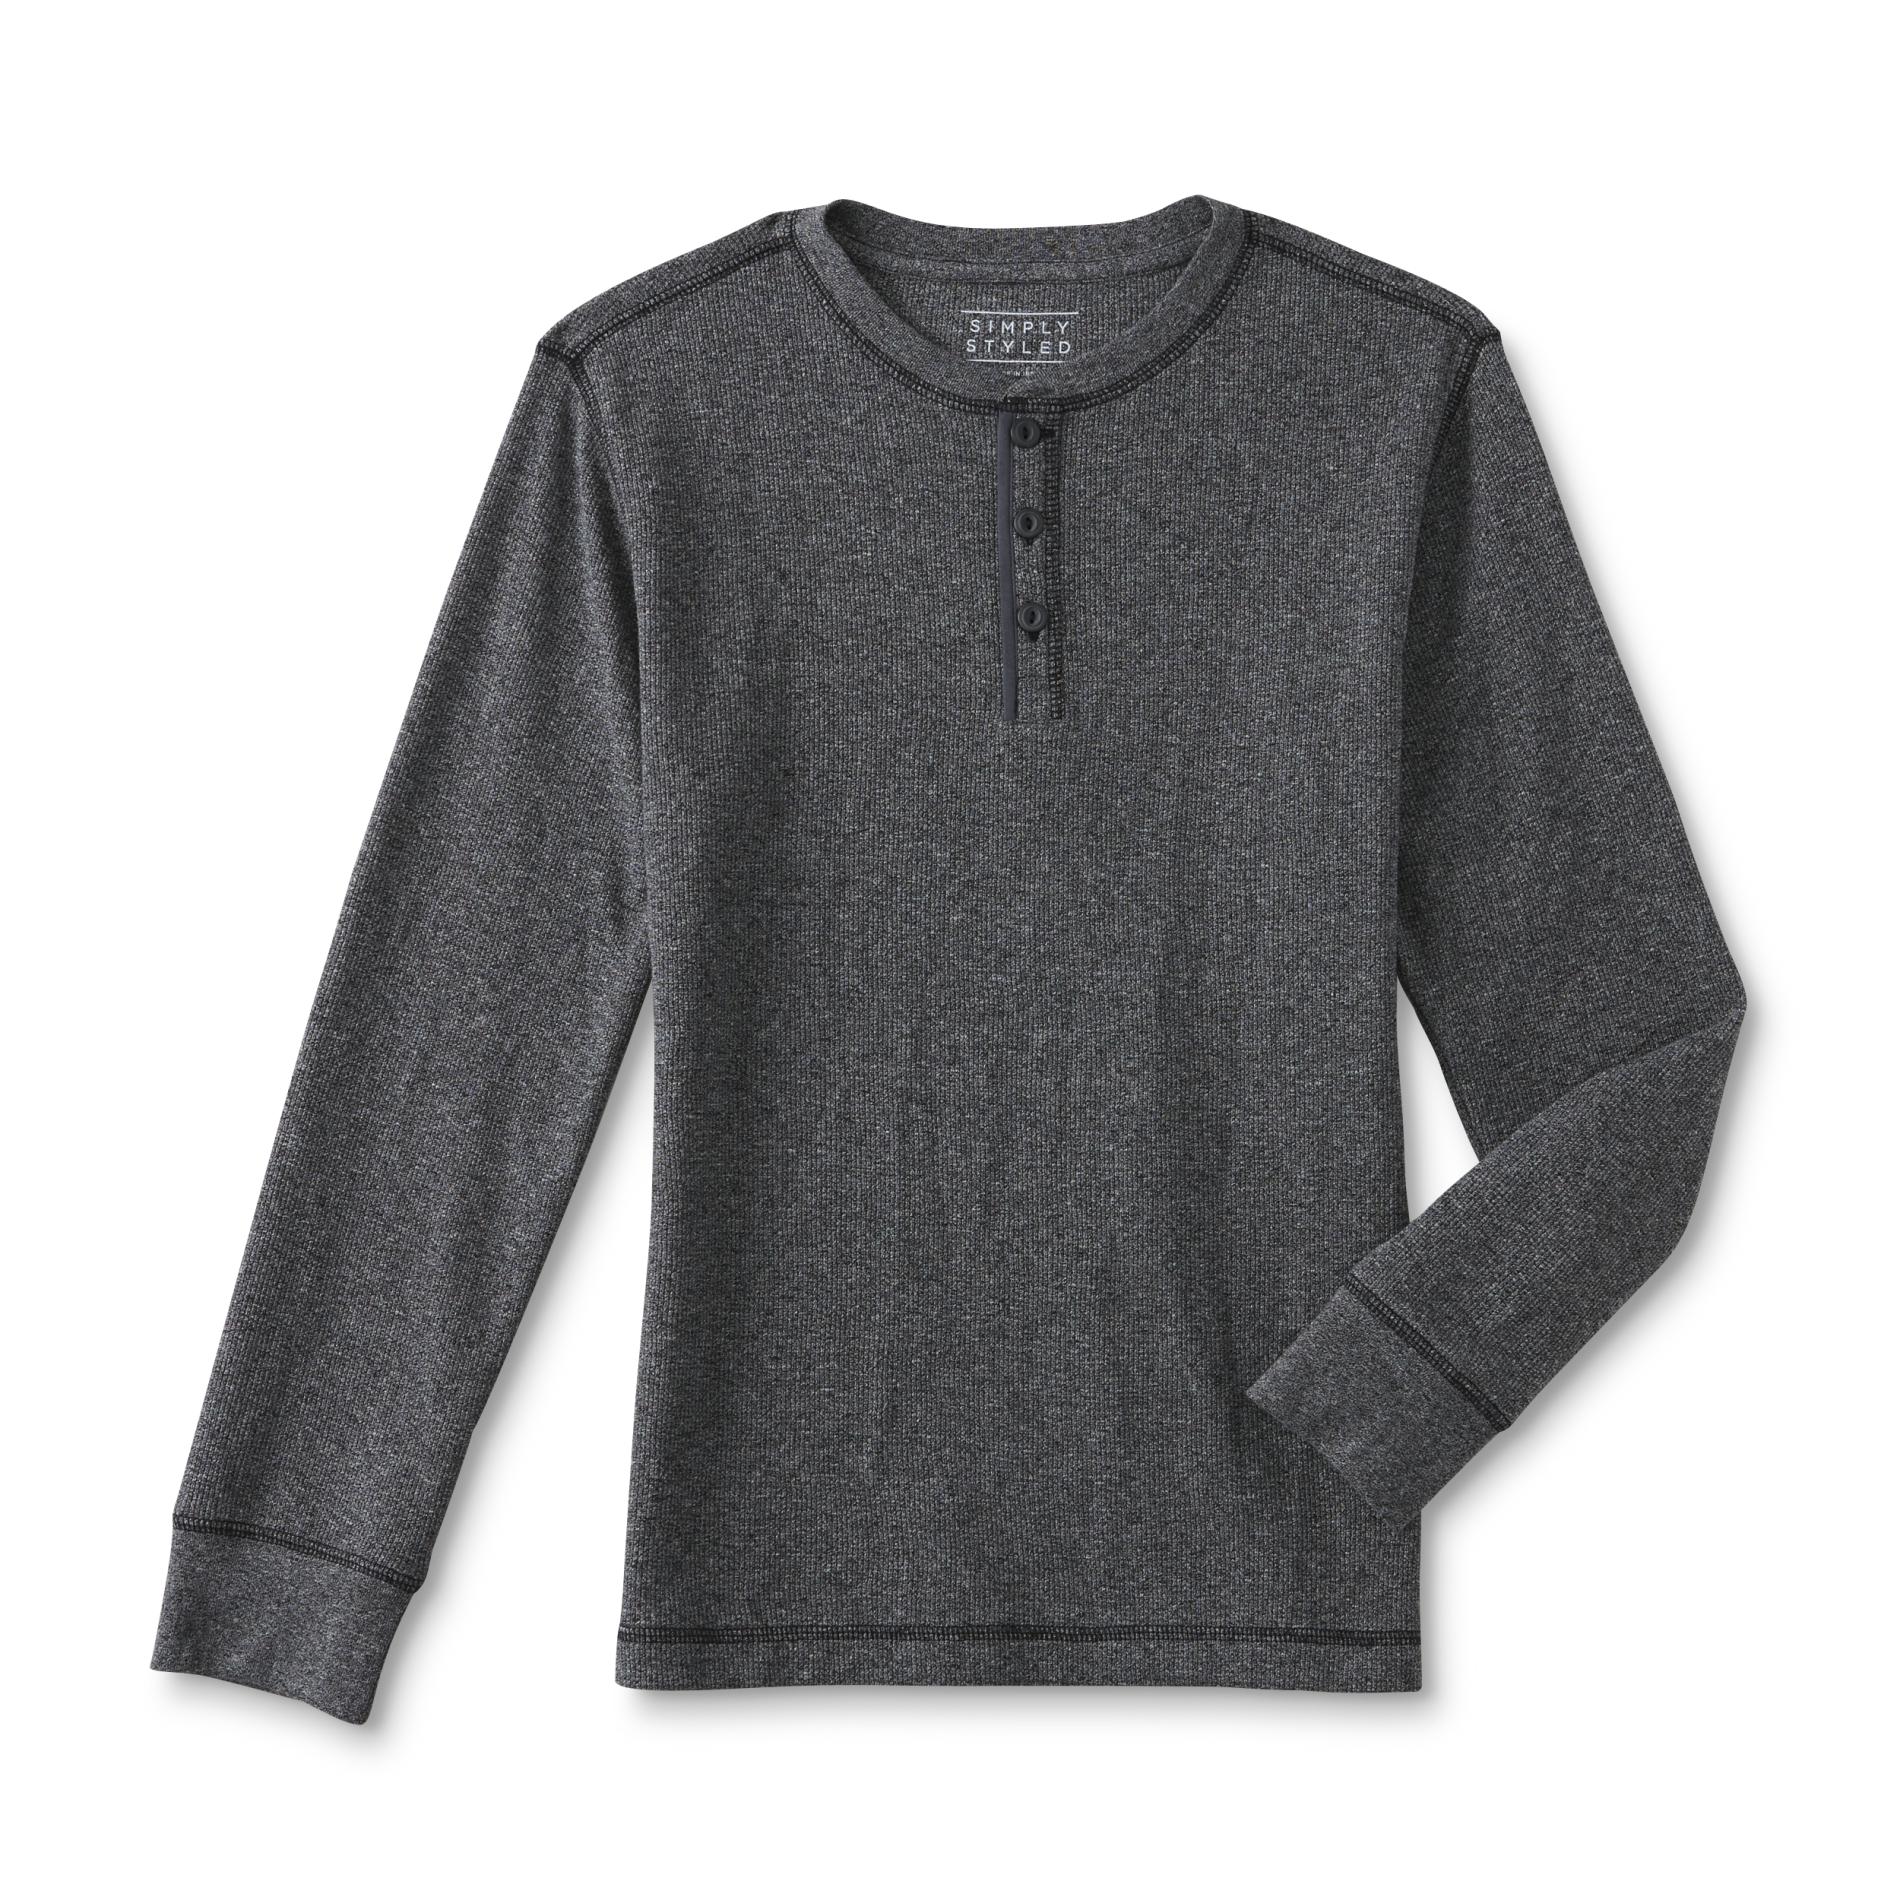 Simply Styled Boy's Thermal Henley Shirt